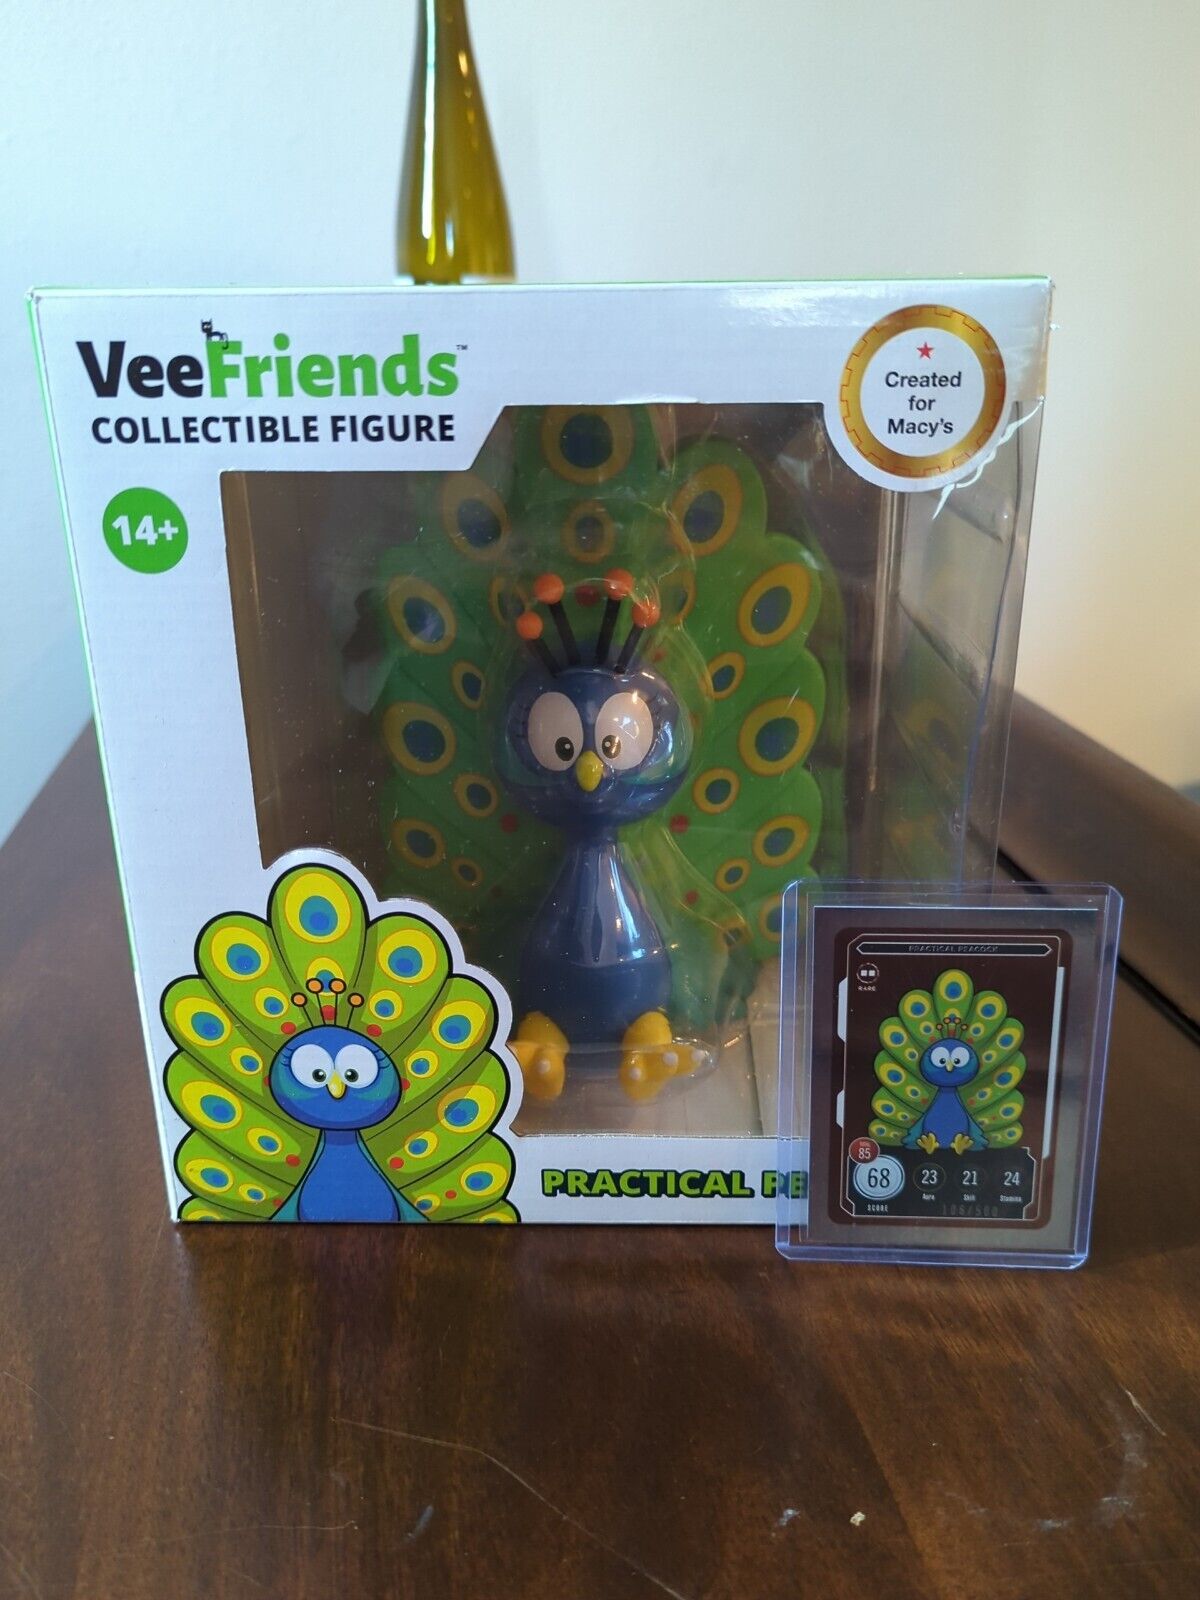 Veefriends Practical Peacock Collectible Figure And Zero Cool Trading Card...